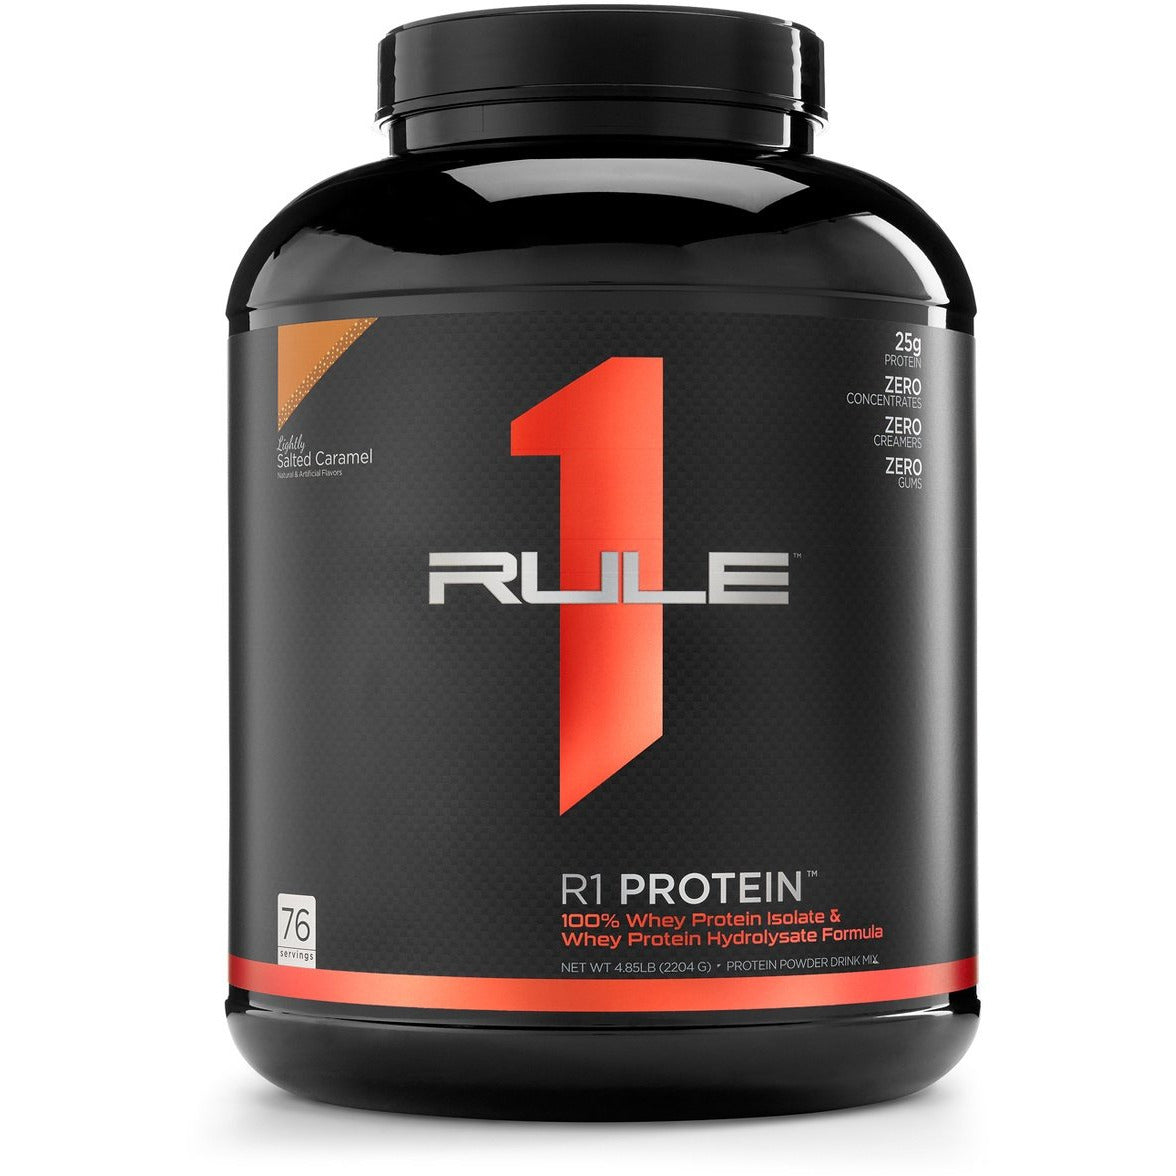 R1 PROTEIN // Whey Protein Isolate & Hydrolyzed  (71 Serve -76 Serve)